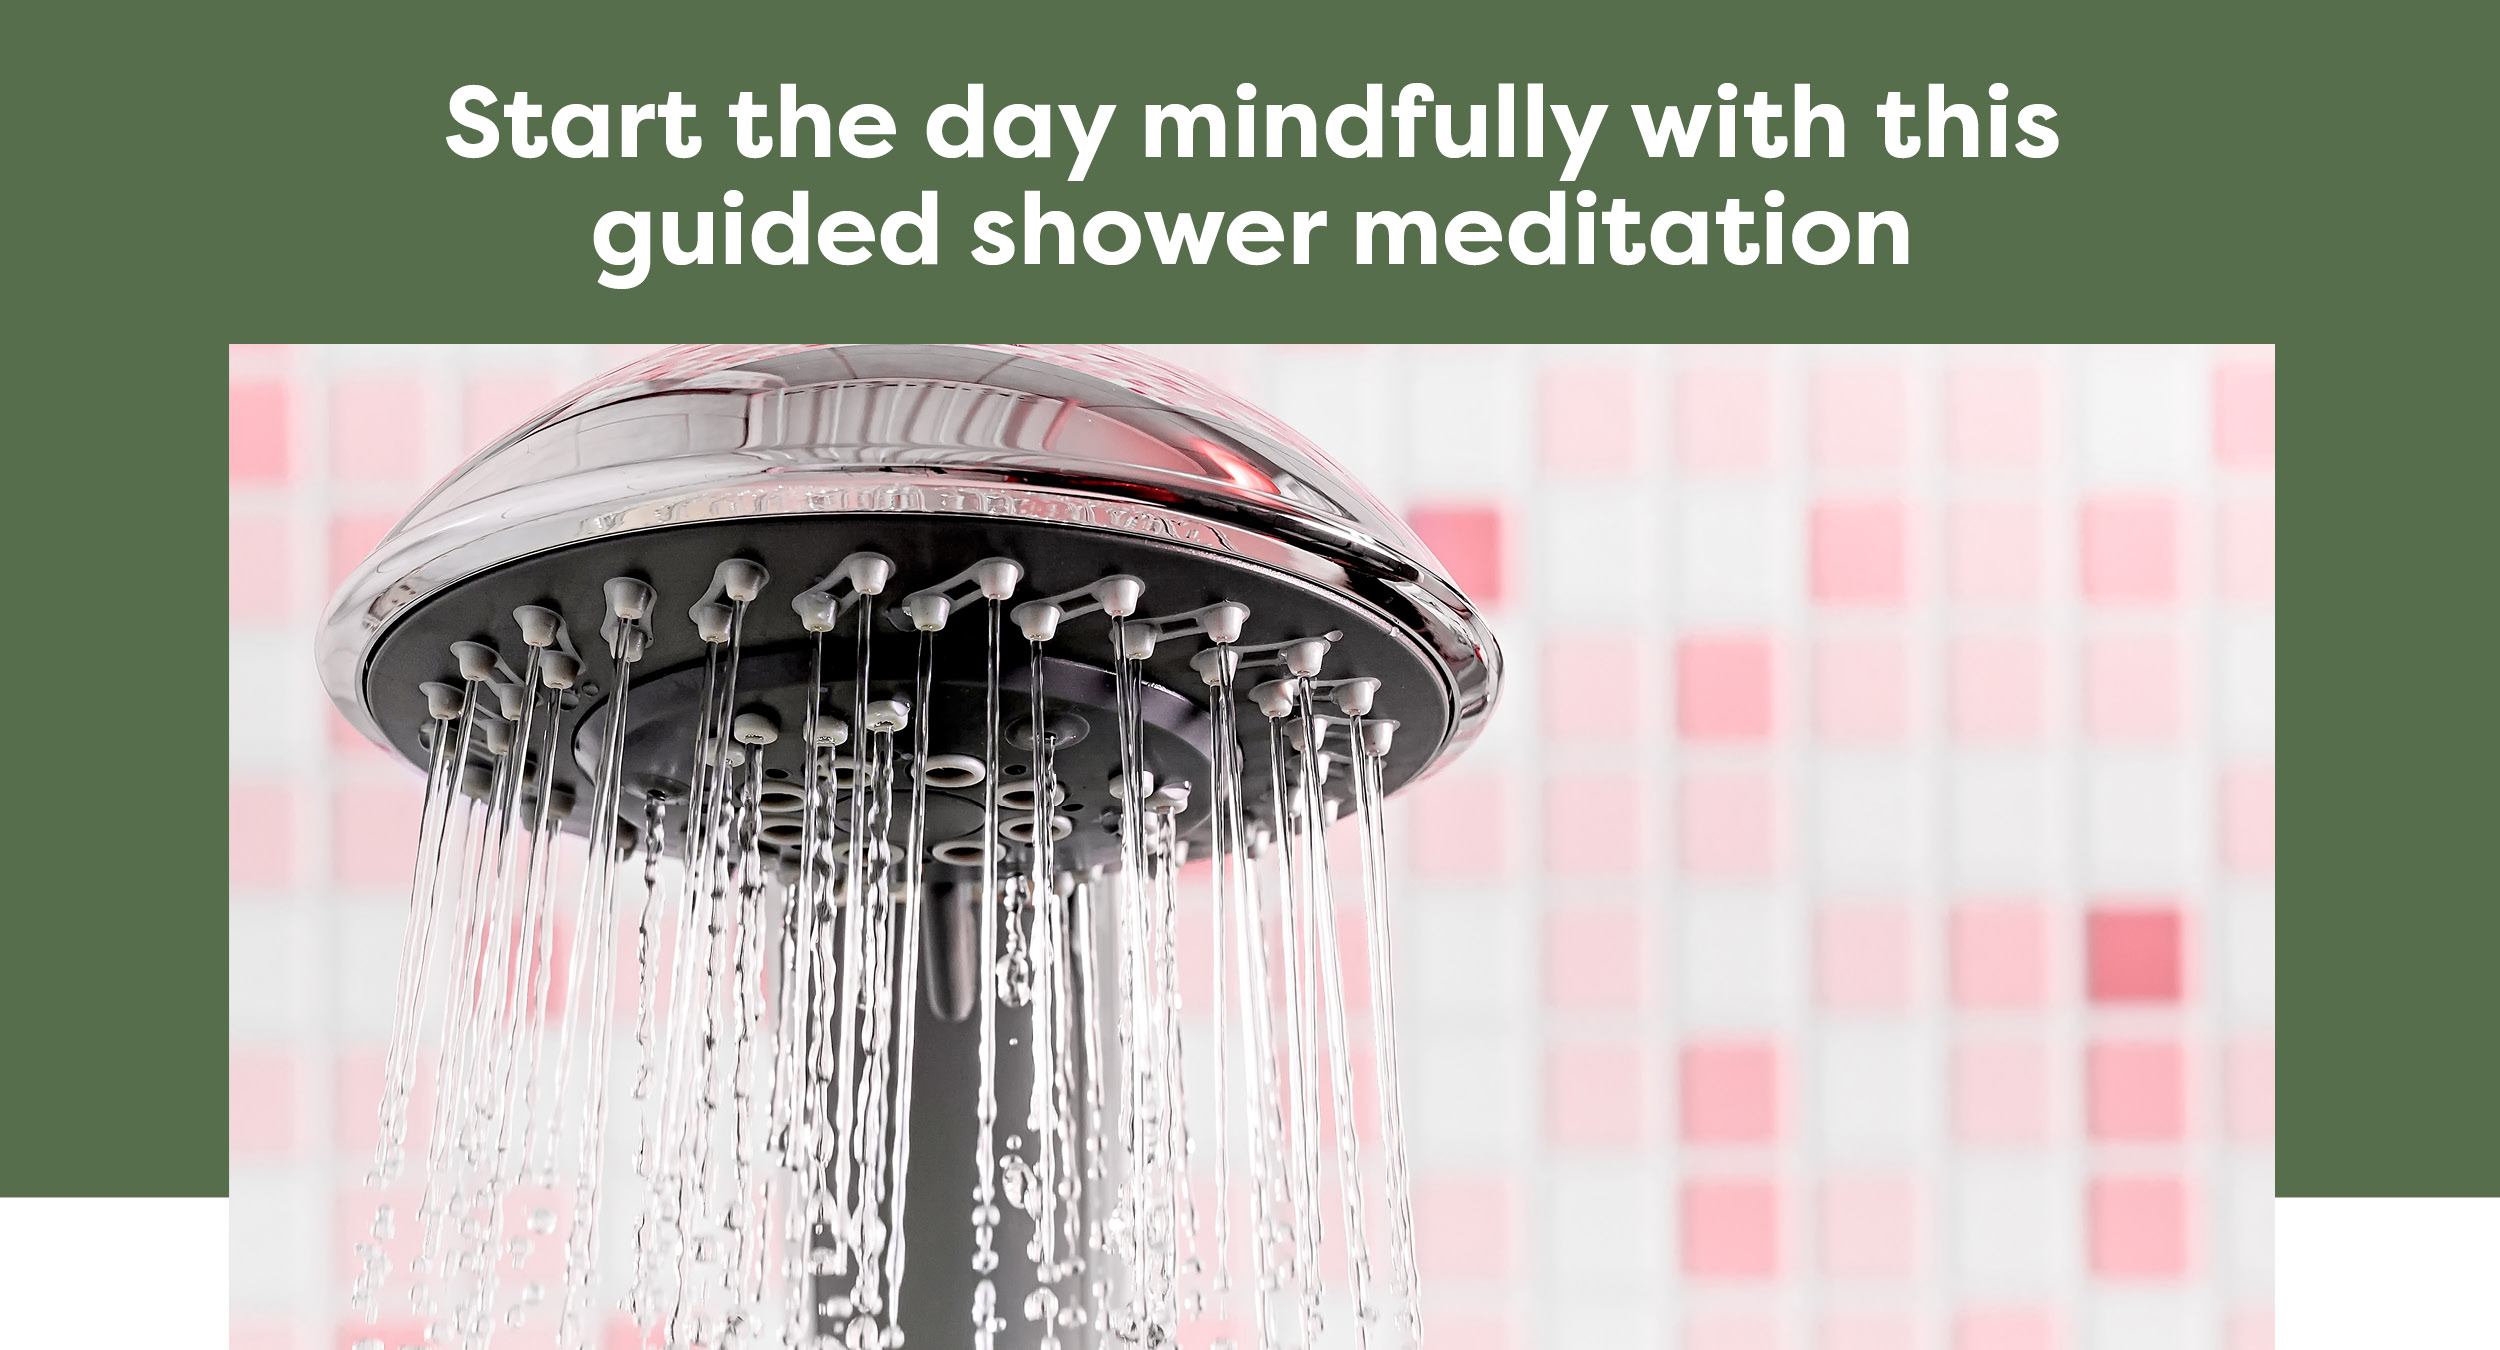 Start the day mindfully with this guided shower meditation